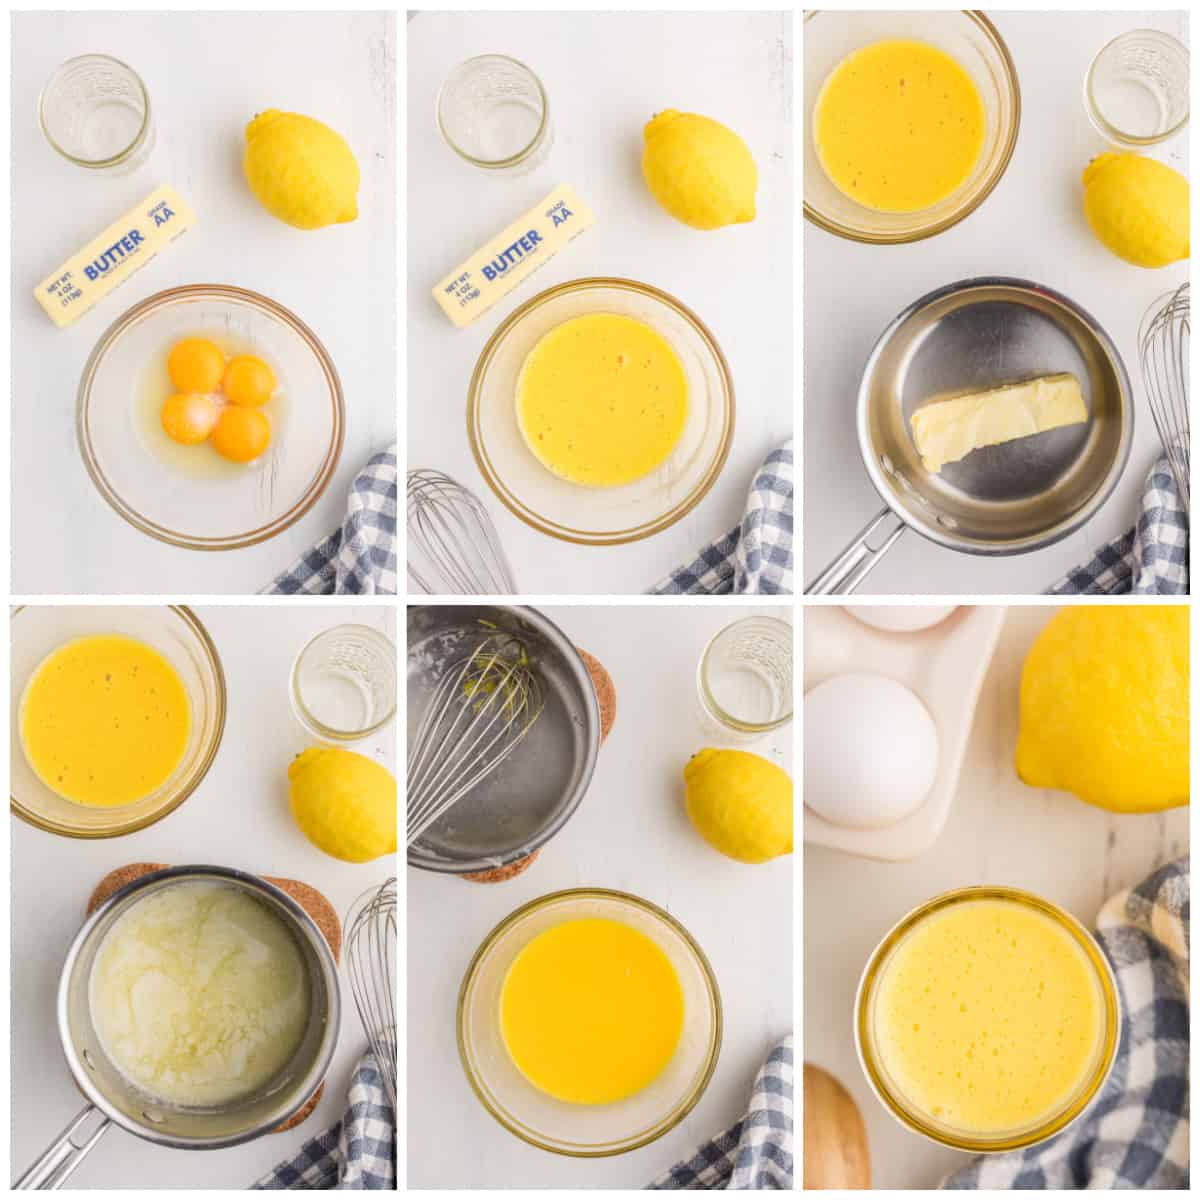 Step by step photos on how to make Hollandaise Sauce.